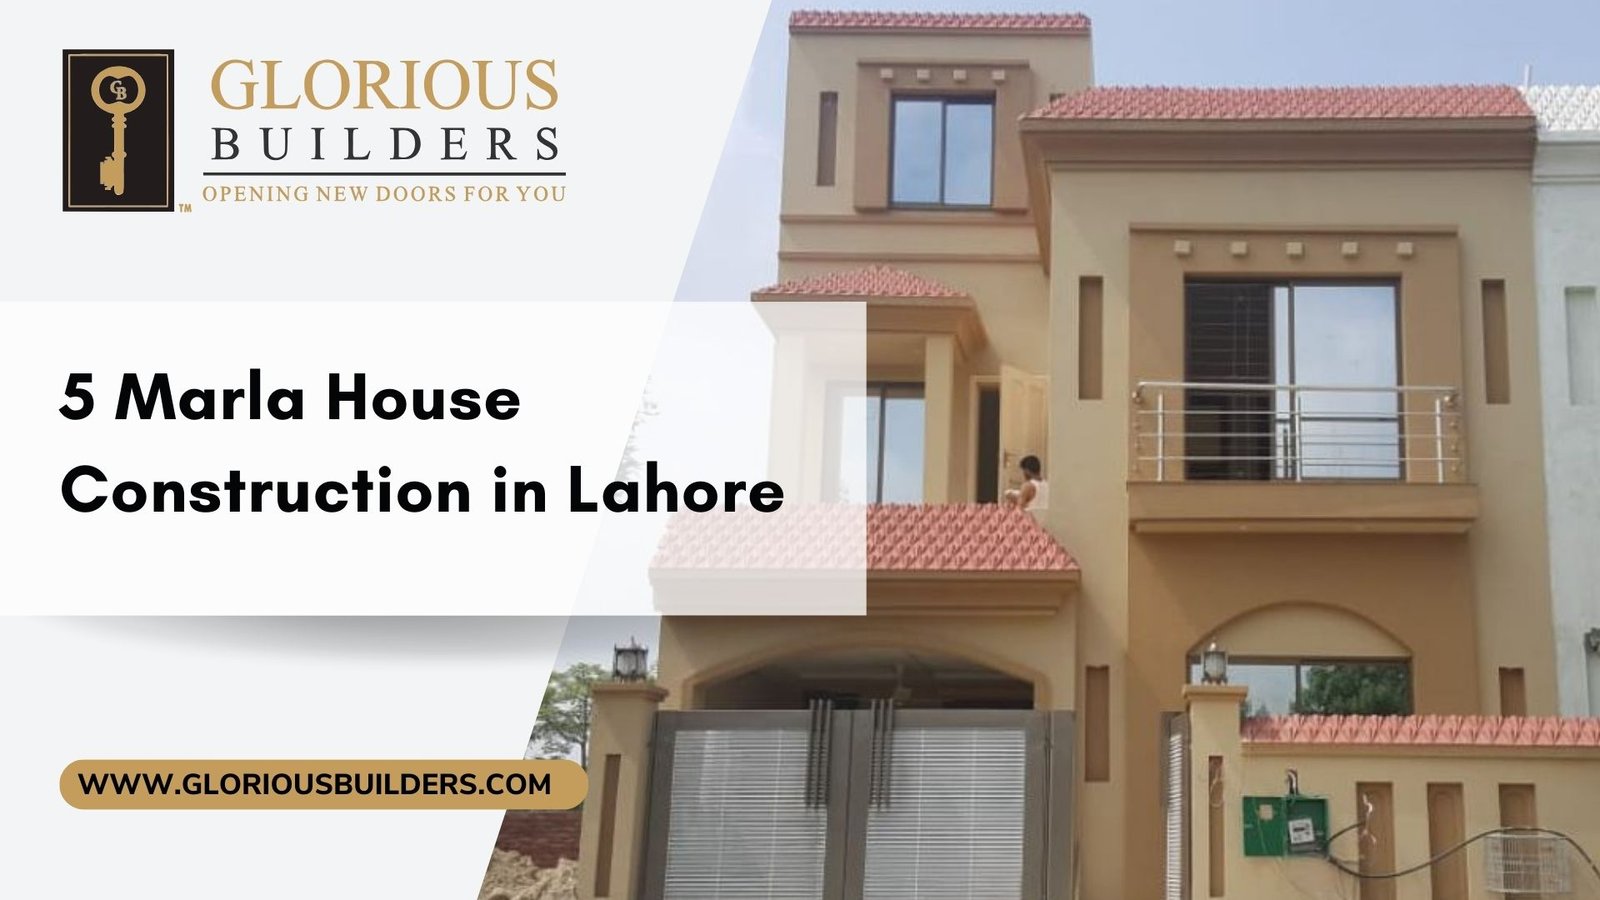 5 Marla House Construction in Lahore